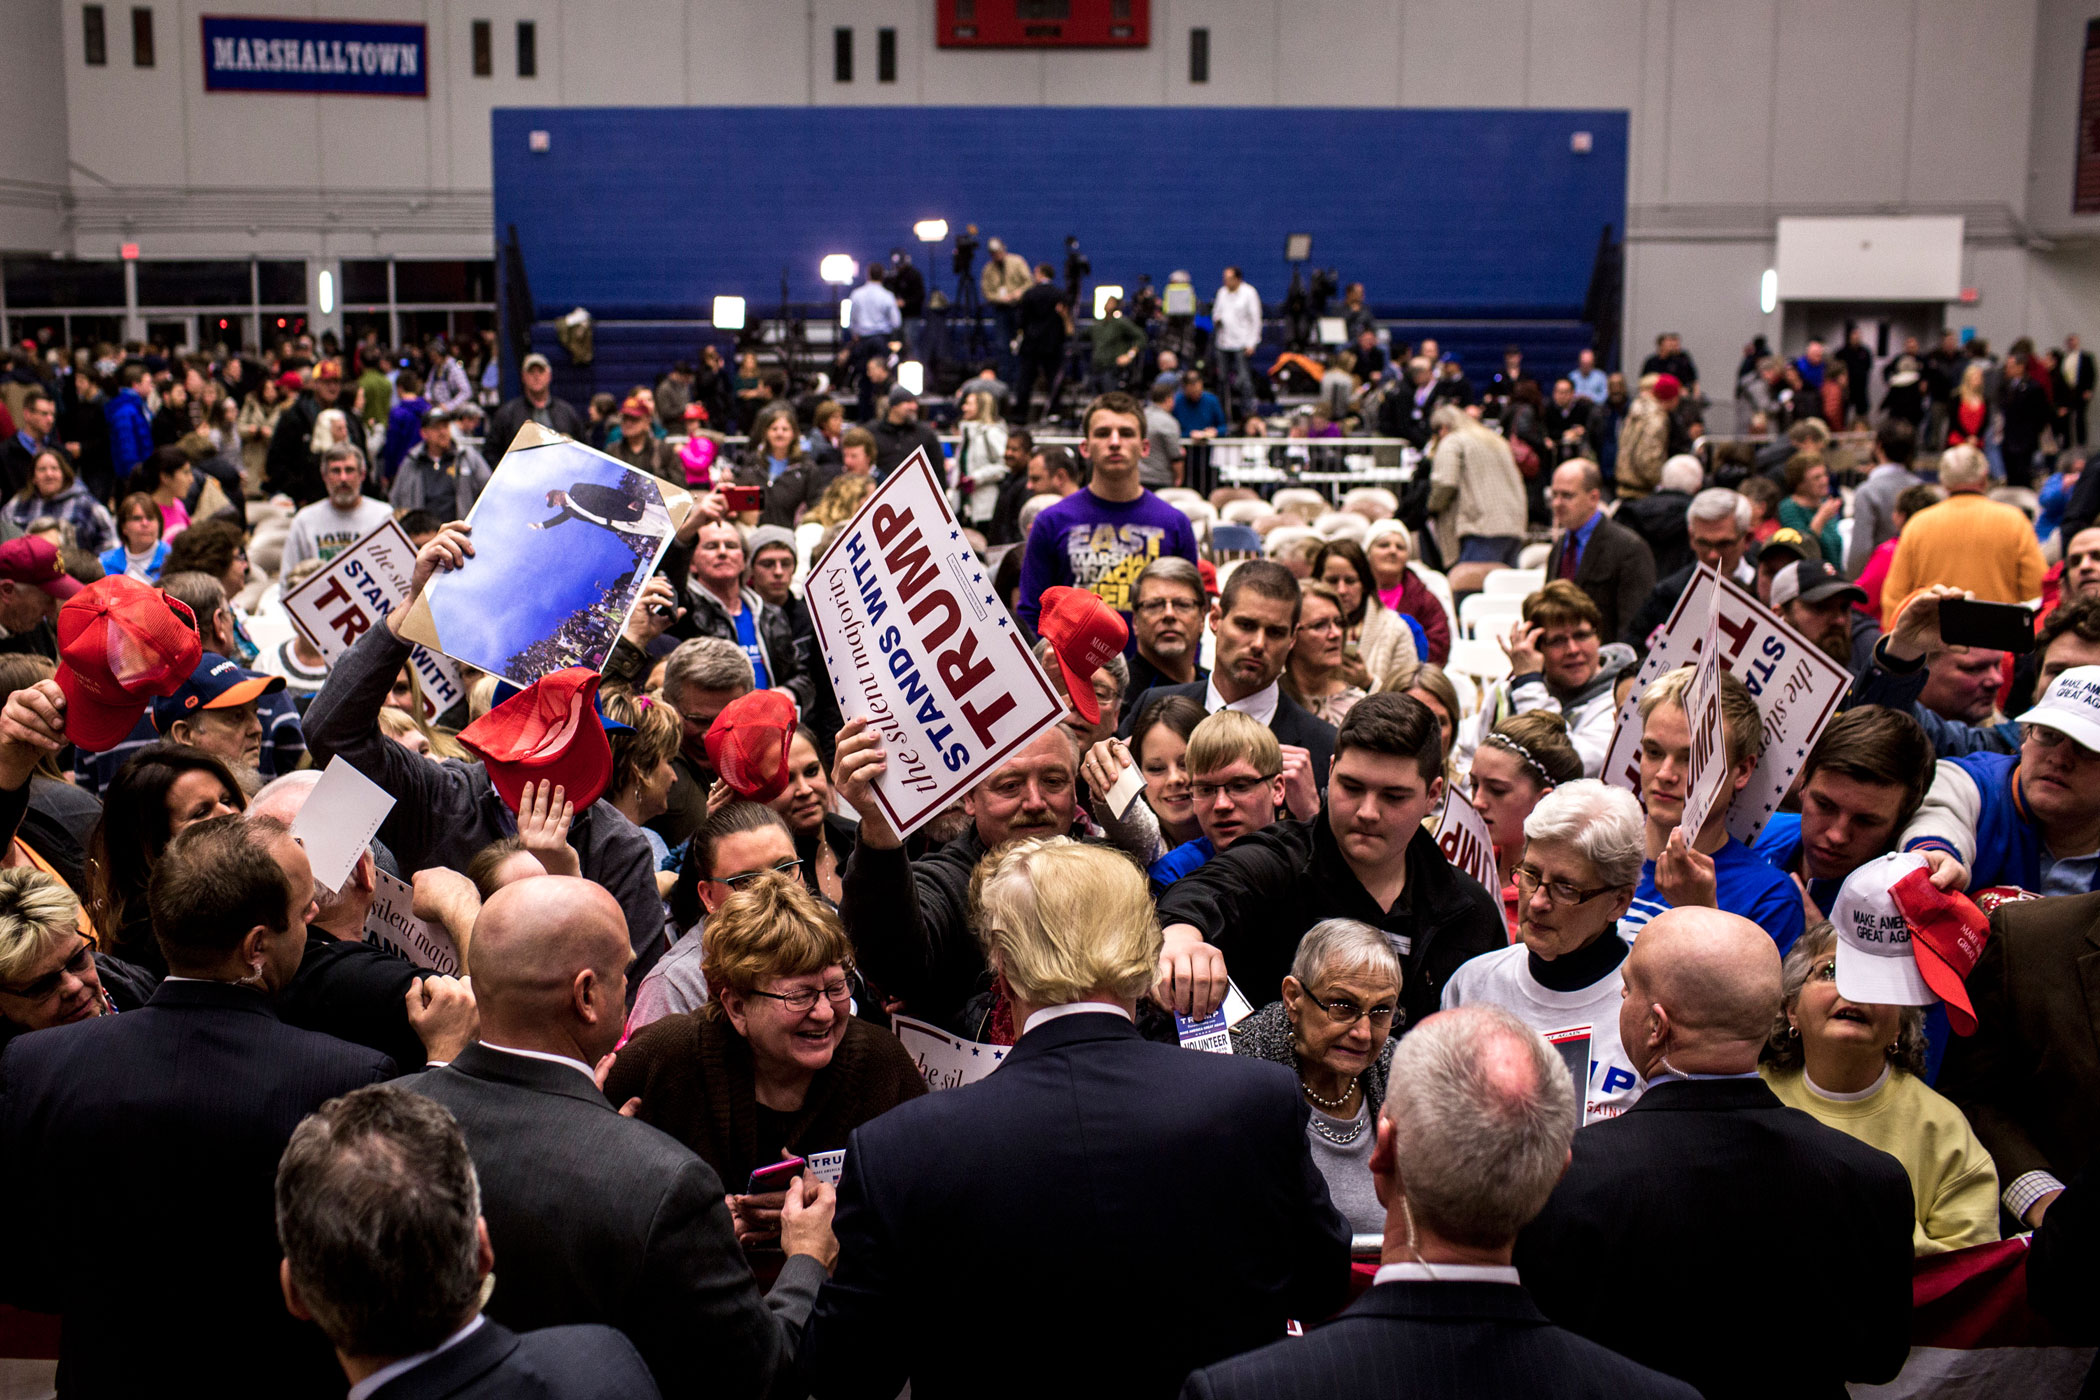 Donald Trump greets supporters at a rally in Des Moines, Iowa on Jan. 26.